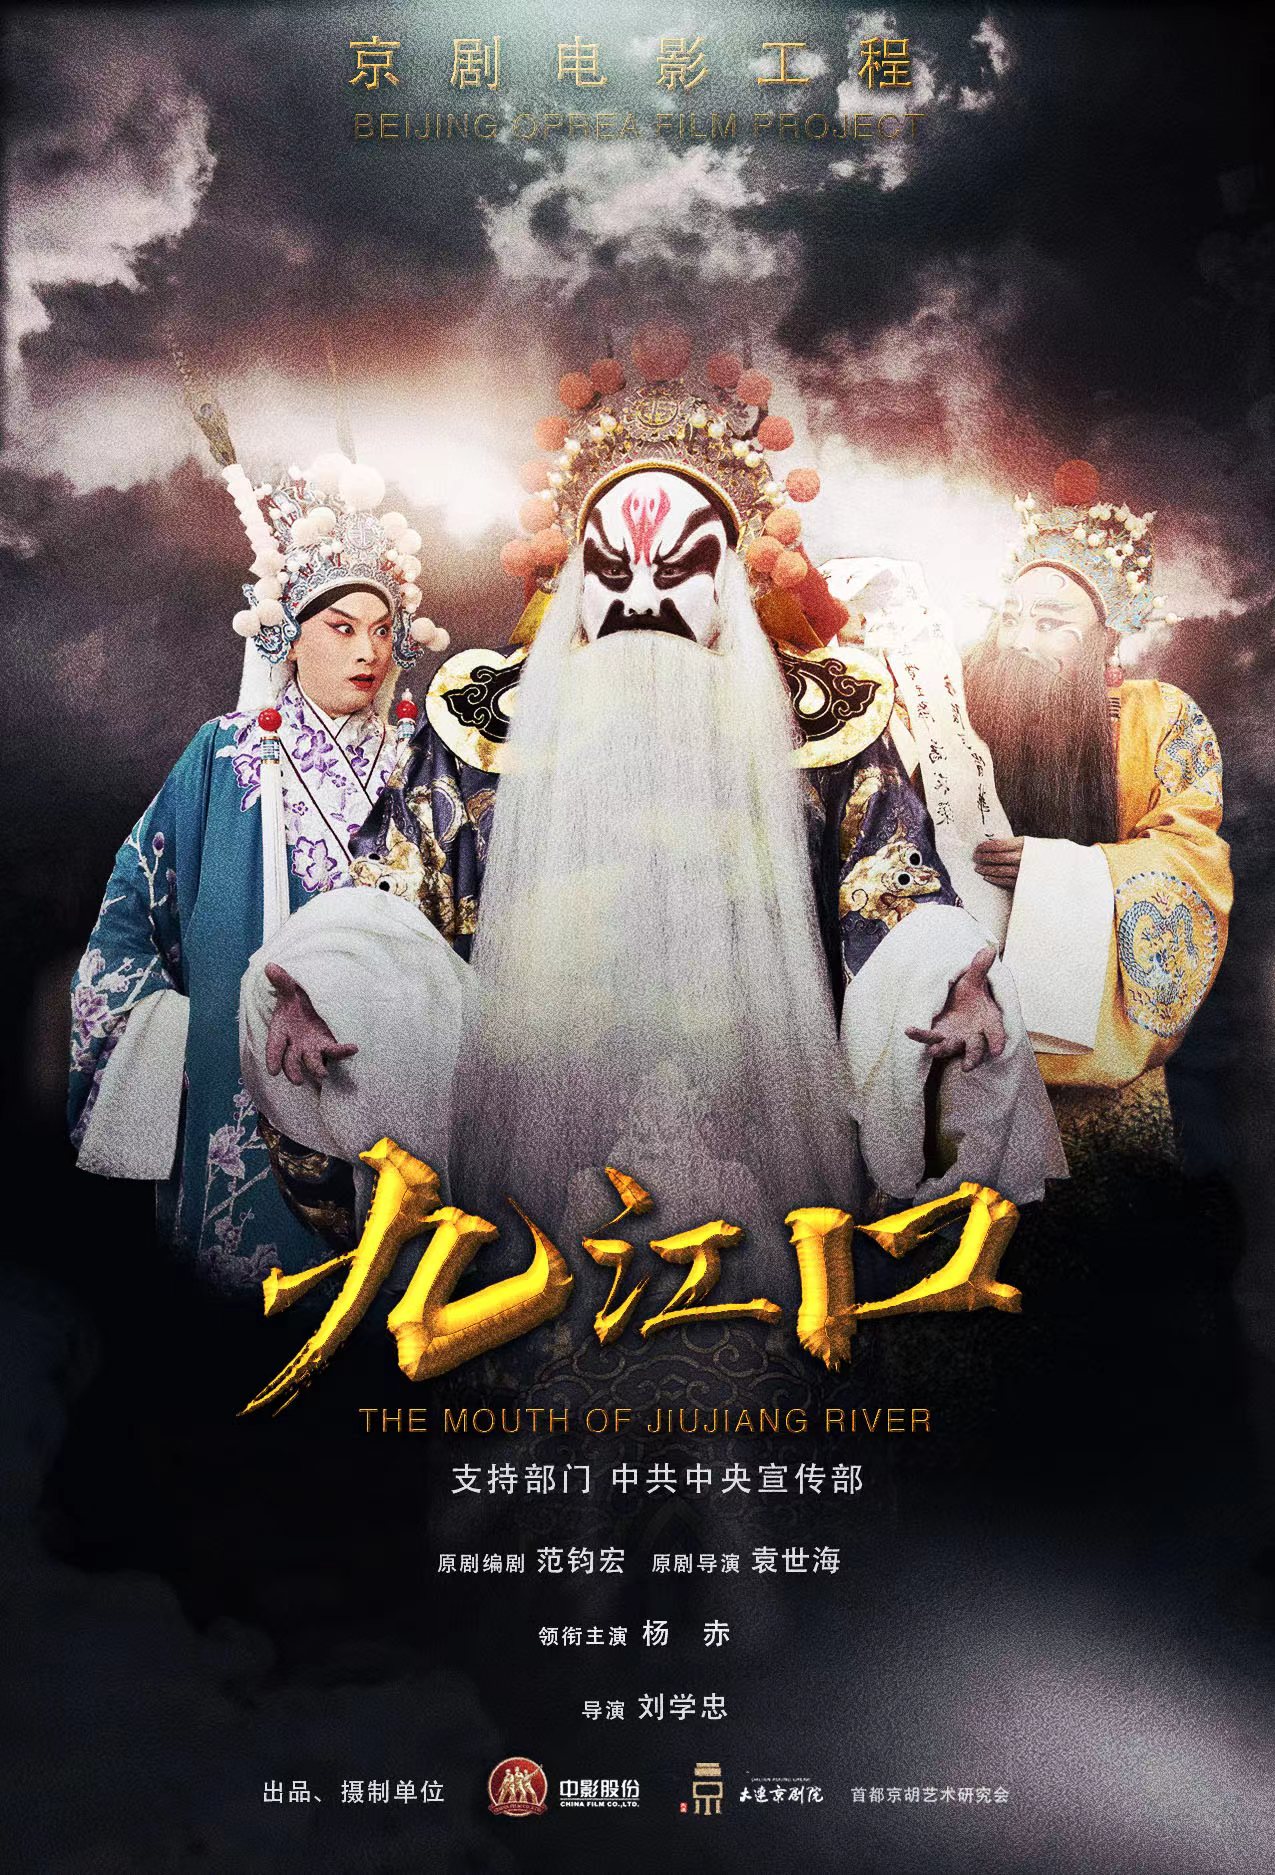 A poster for the Peking Opera film